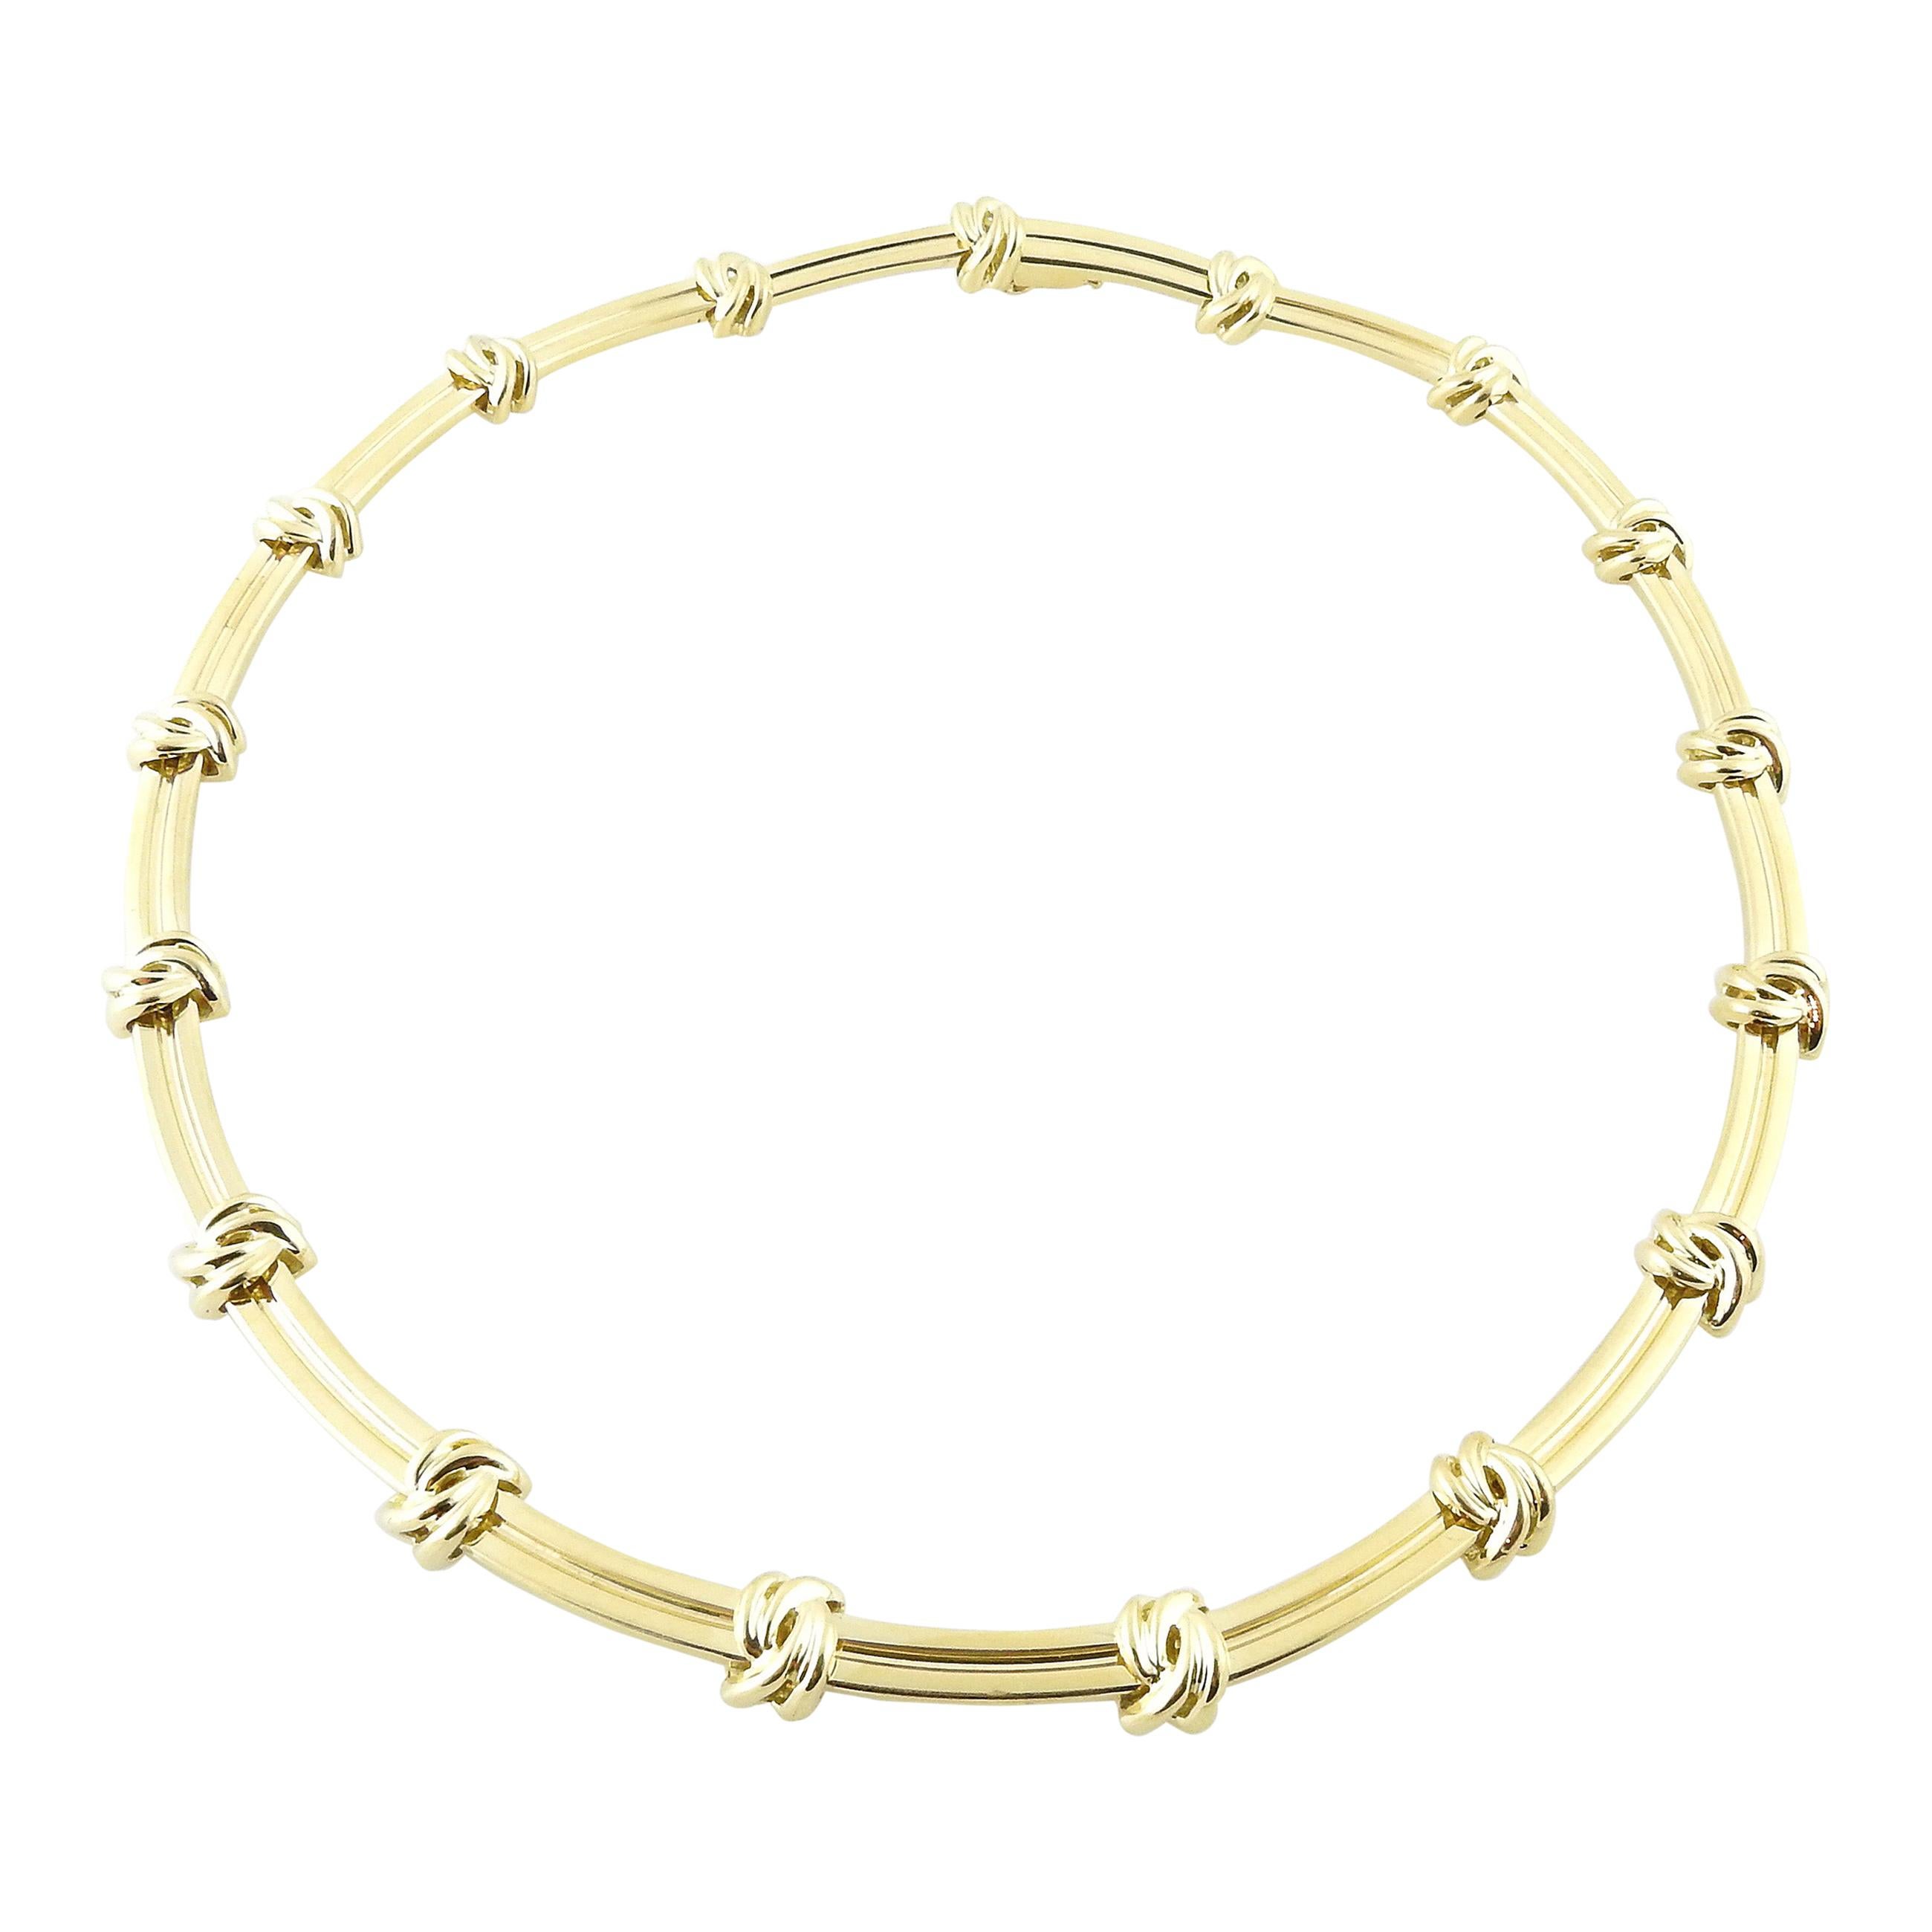 Tiffany & Co. 18k Yellow Gold Love Knot Groove Link Choker